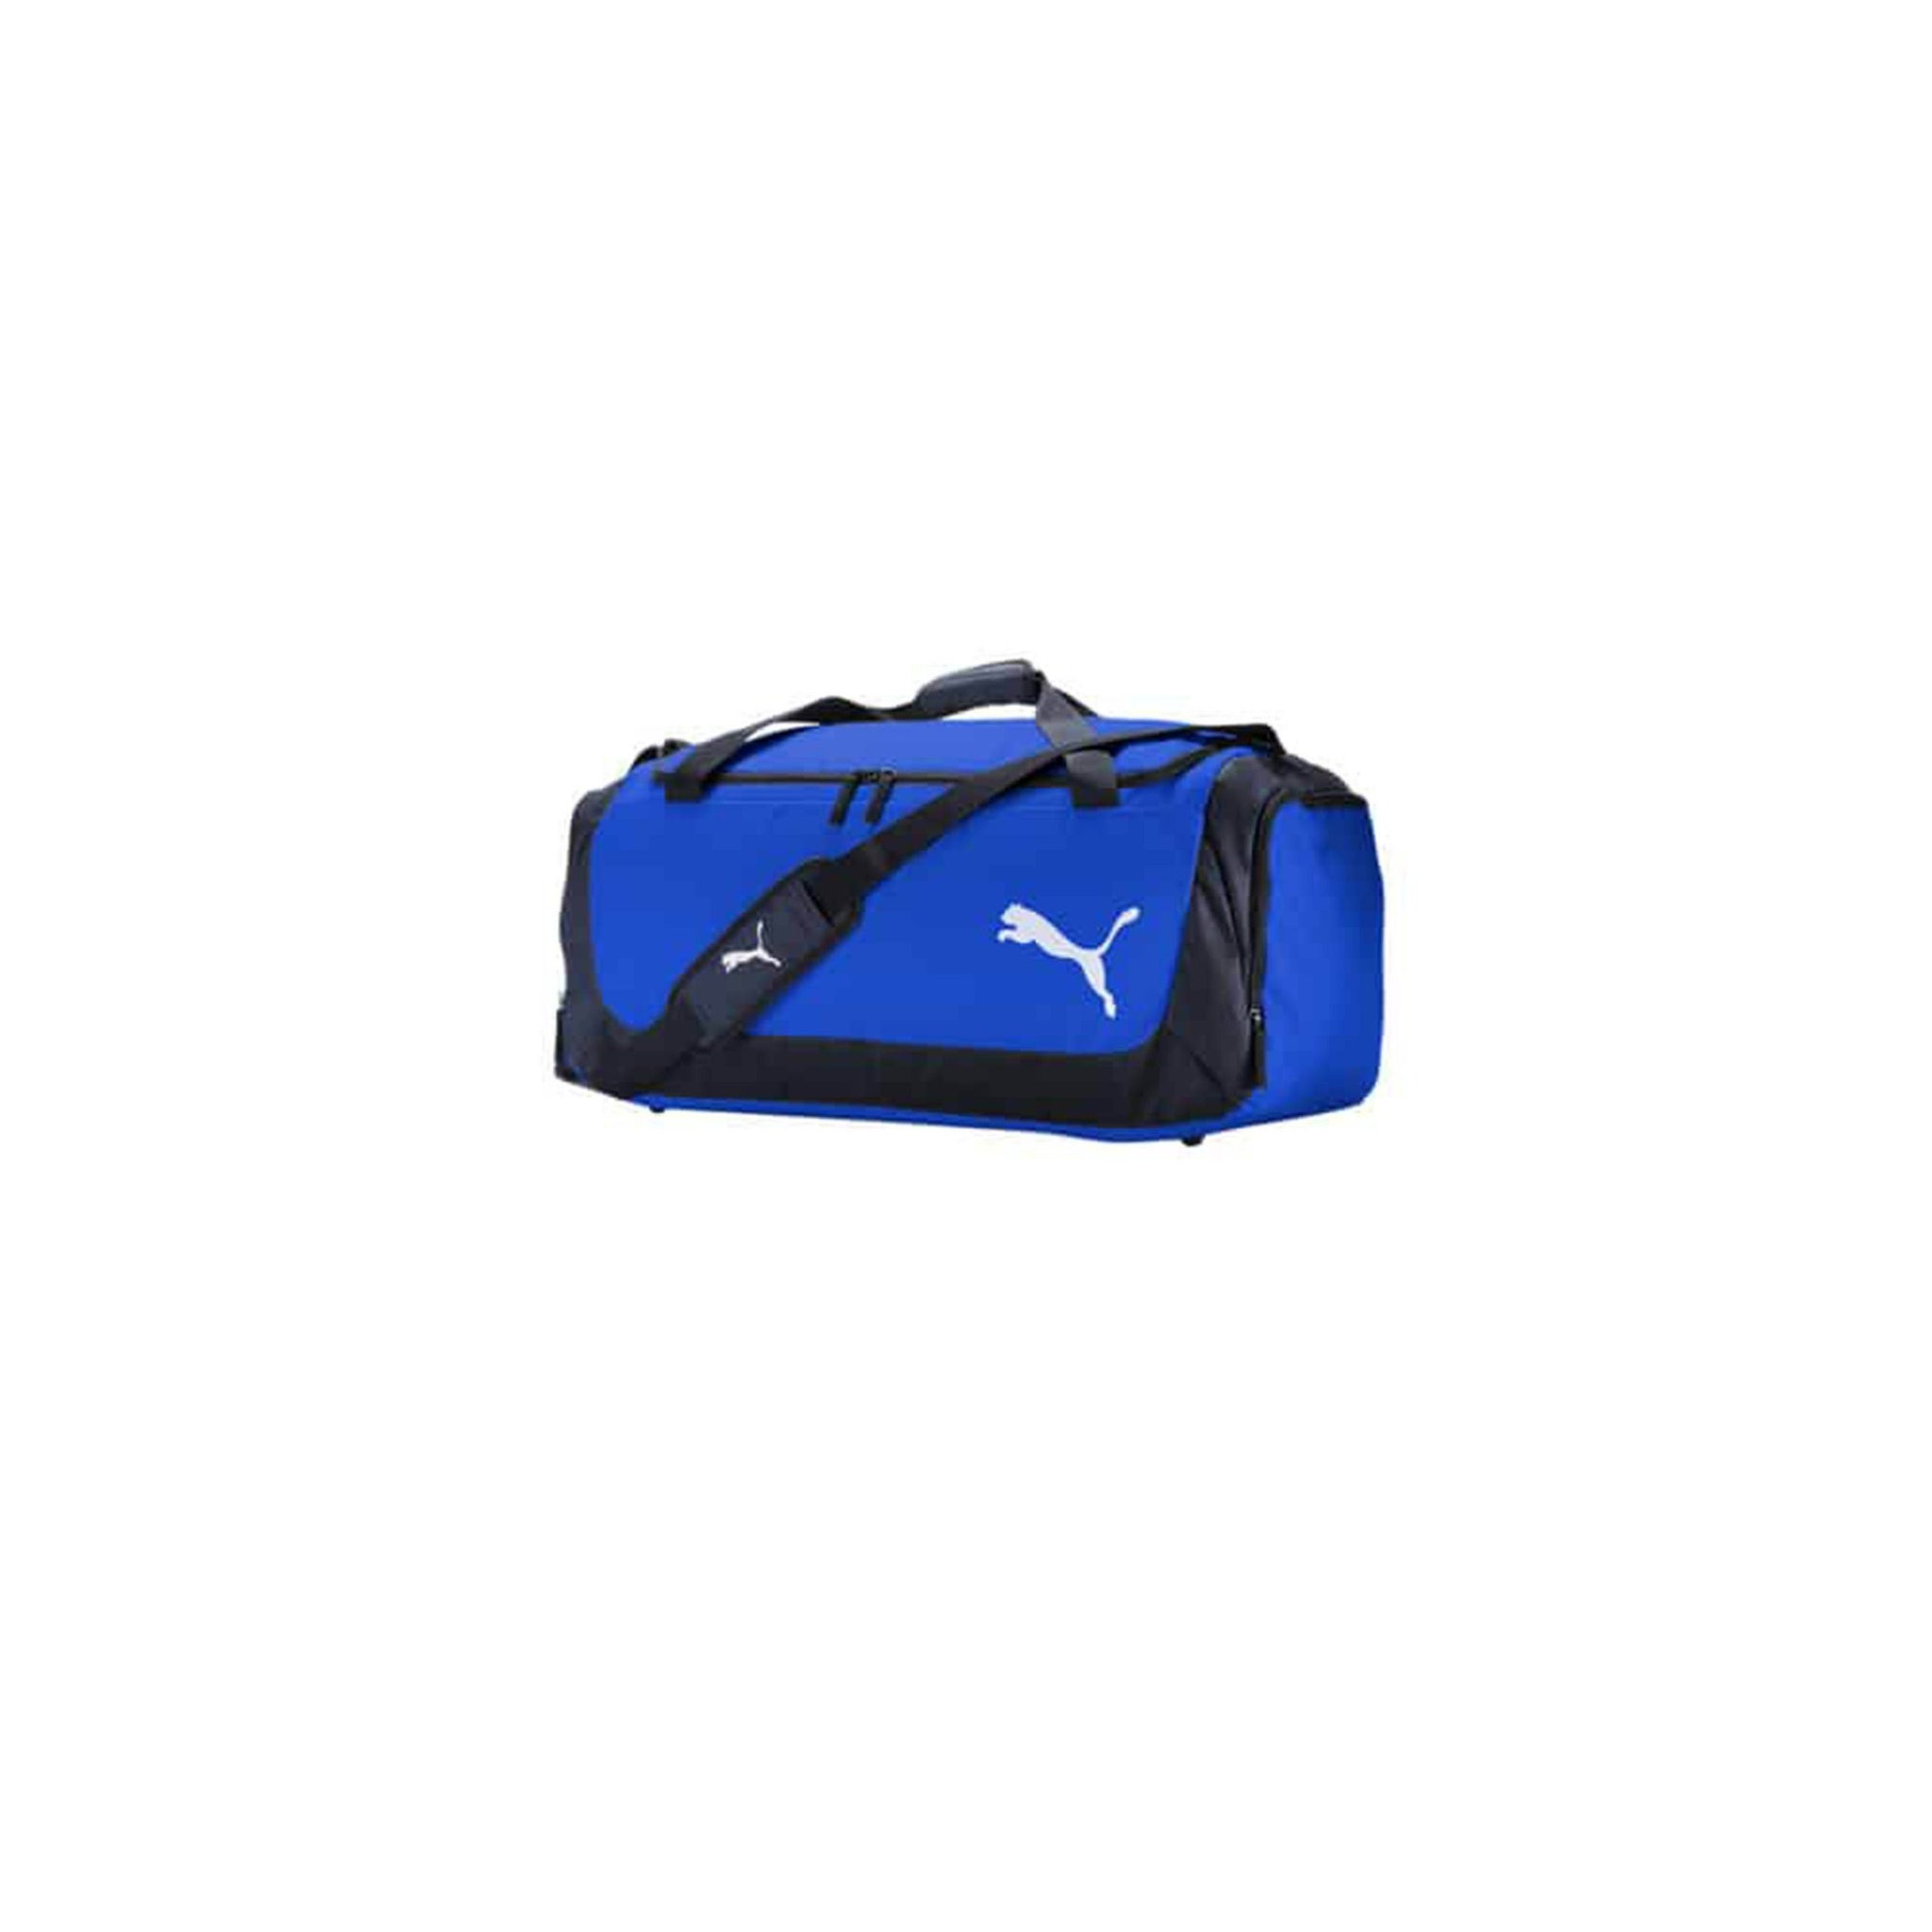 PUMA Blue Backpack in Hubli - Dealers, Manufacturers & Suppliers - Justdial